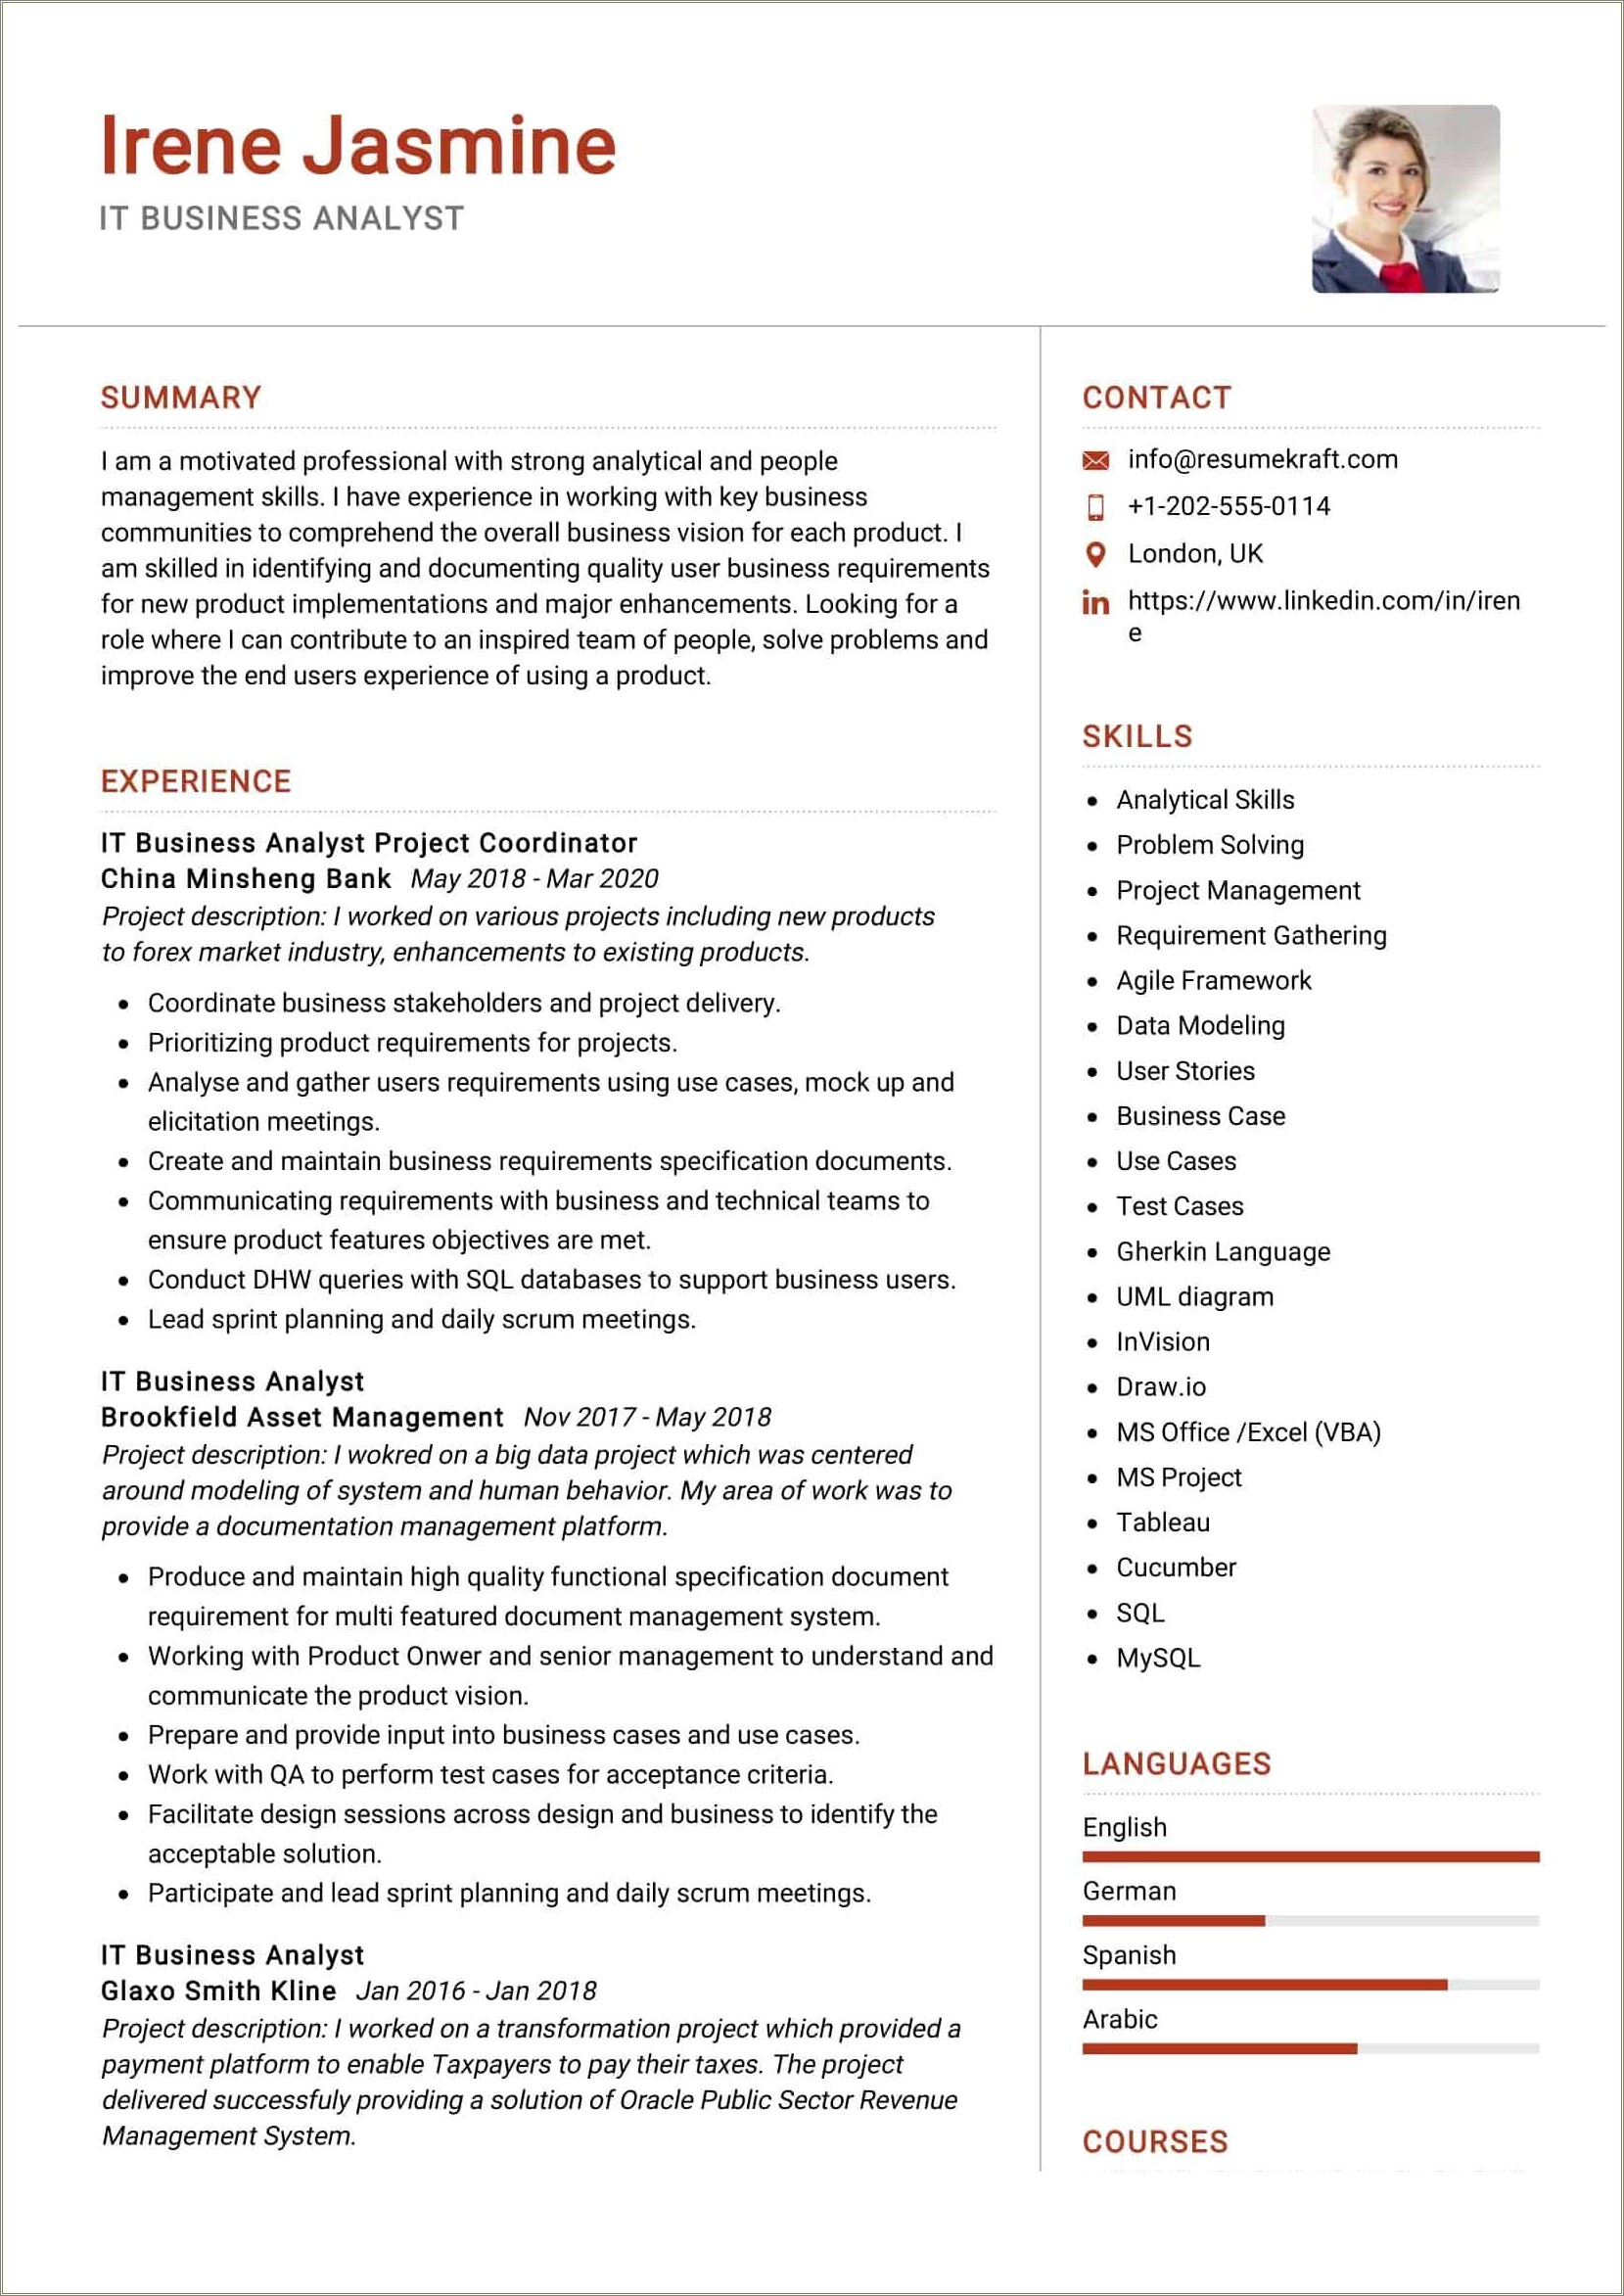 Business Analyst With Sharepoint Experience Resume